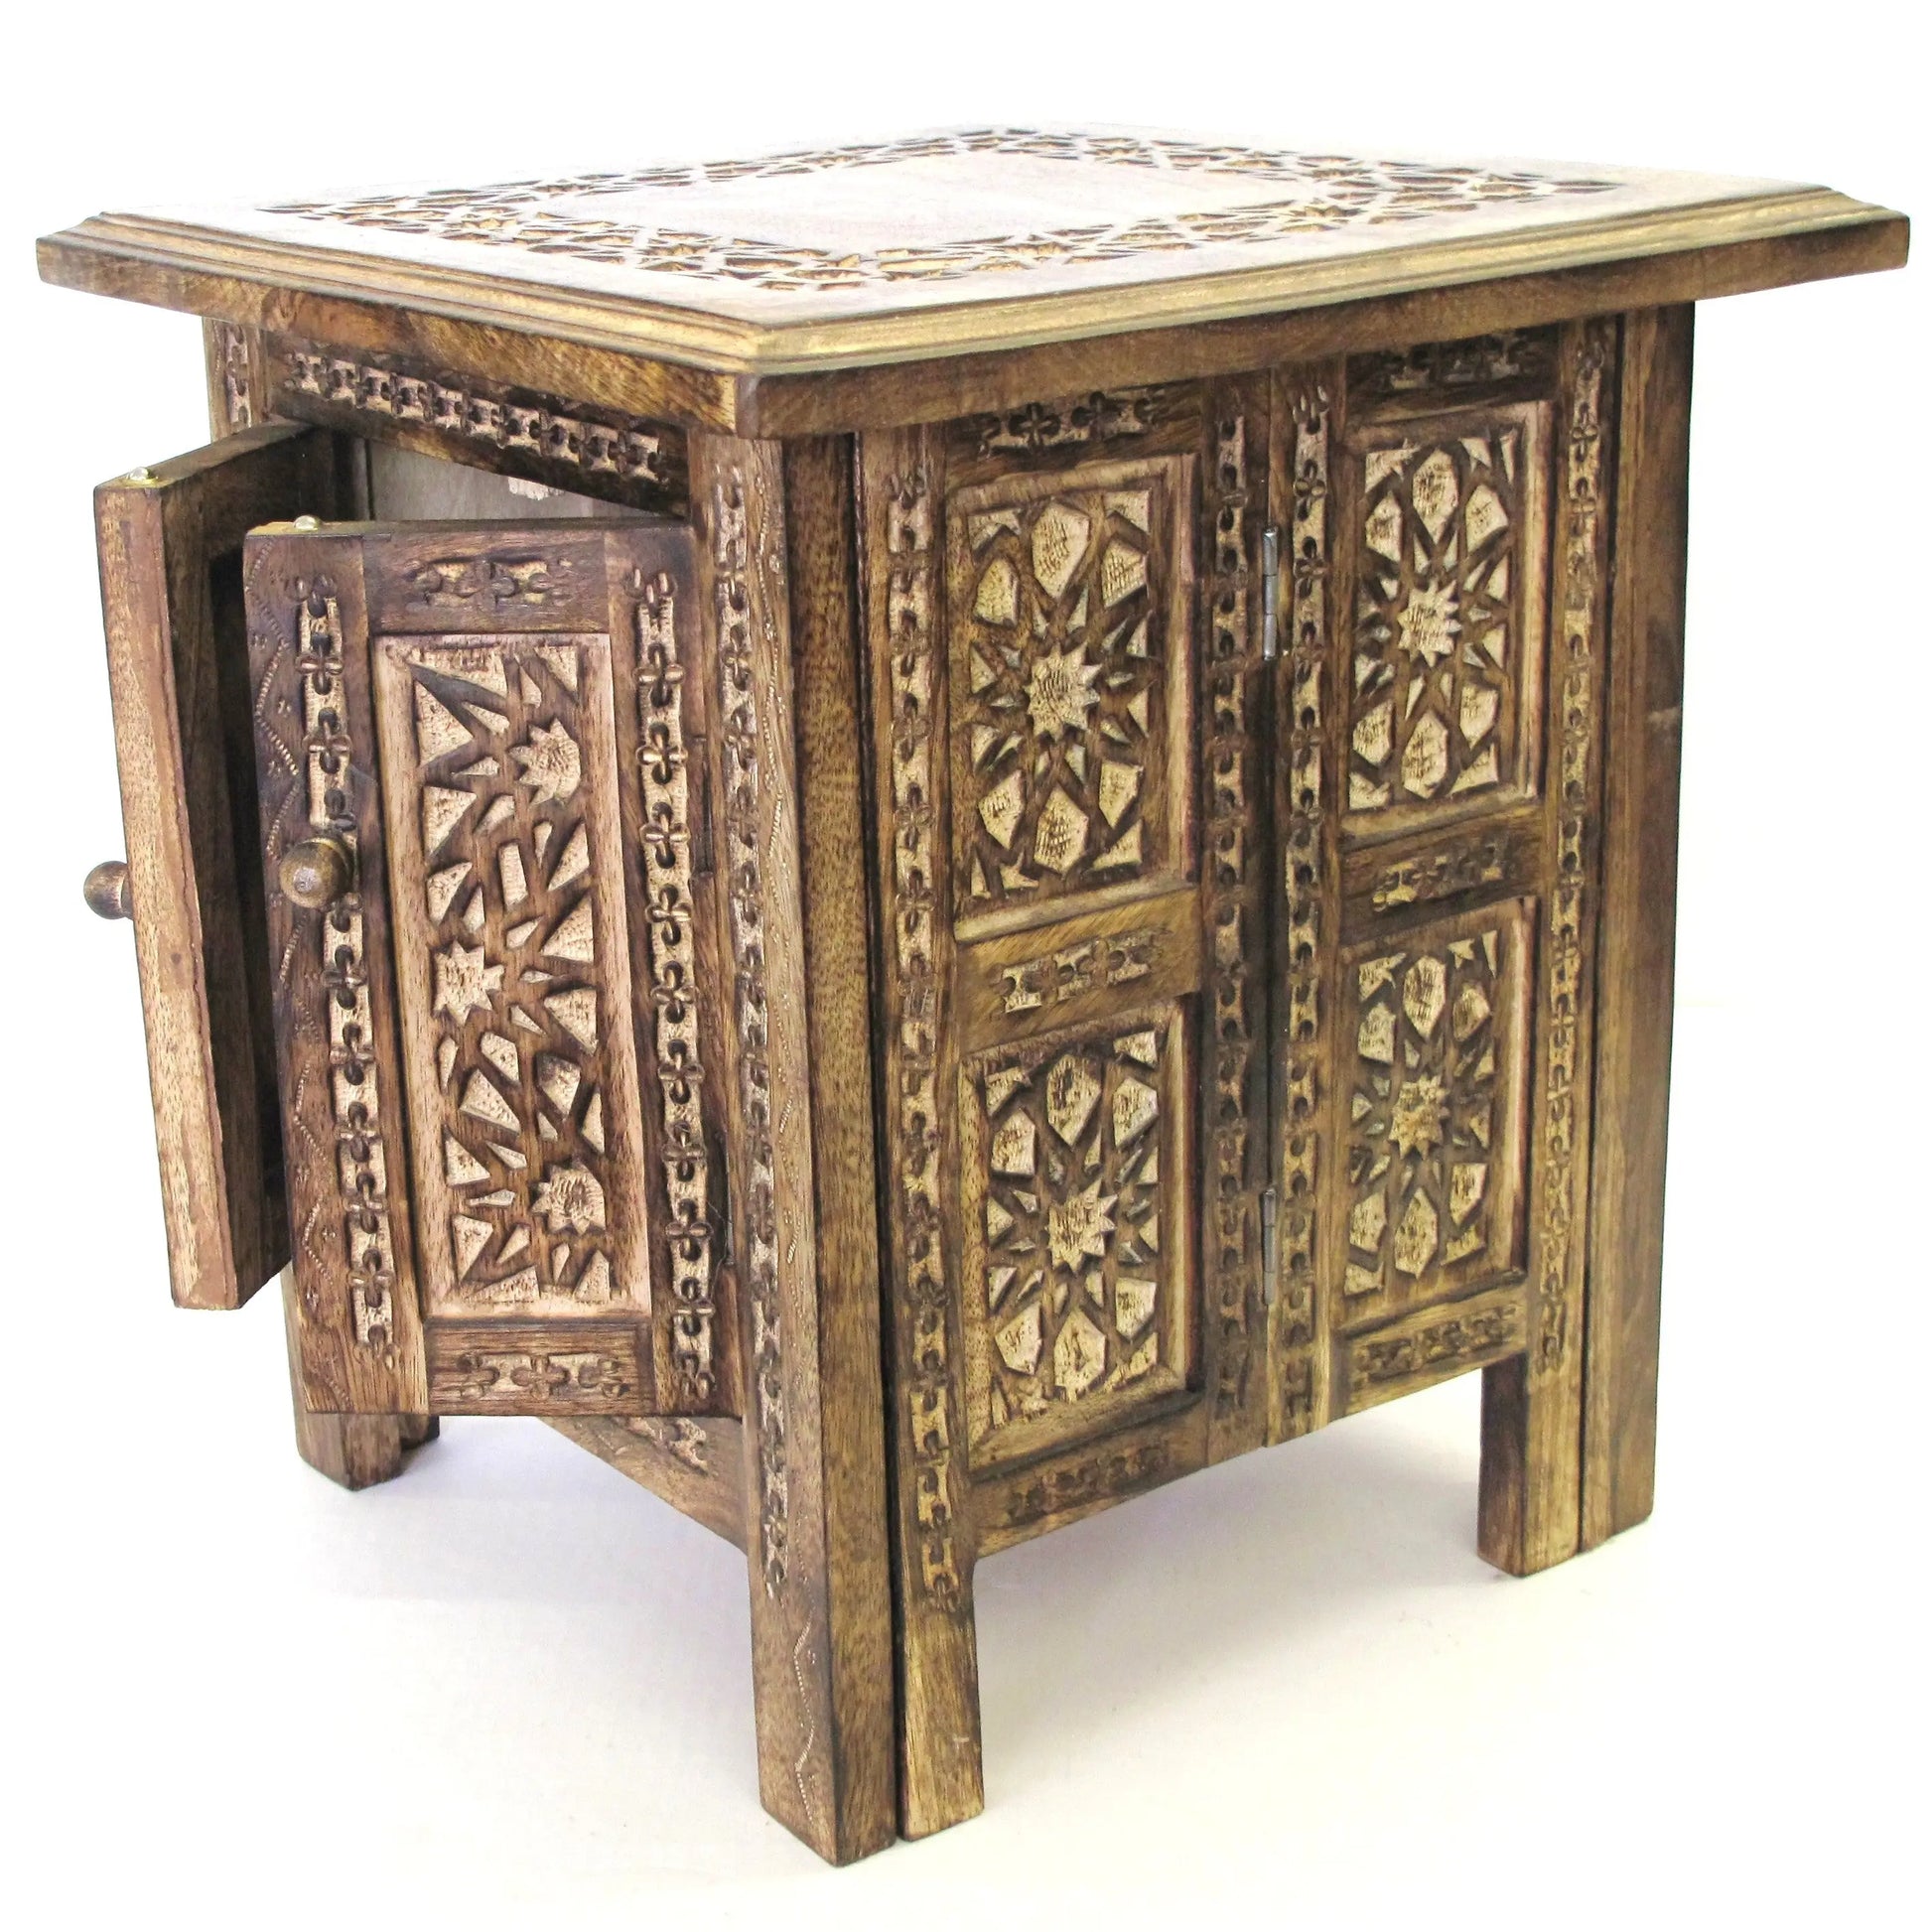 Dal Small Moroccan Style Side Table Doors Open White Background